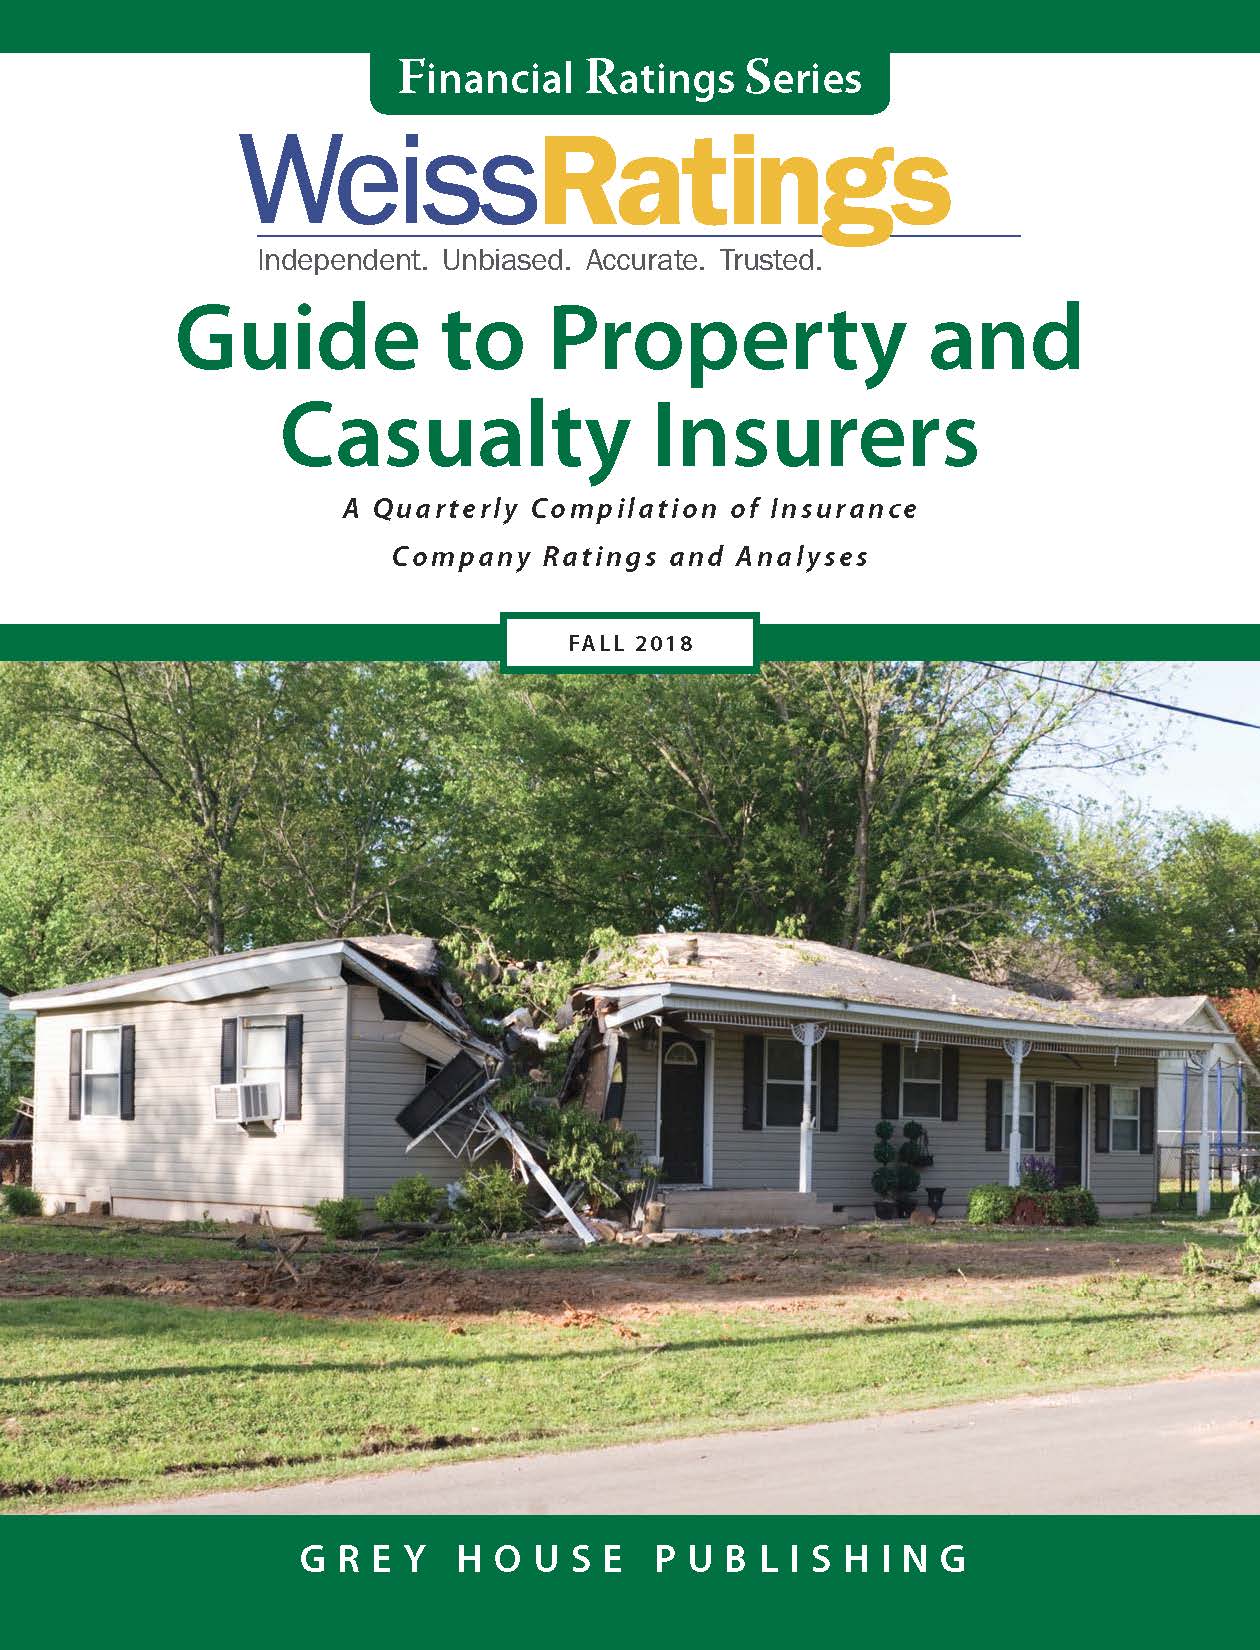 Weiss Ratings Guide to Property & Casualty Insurers